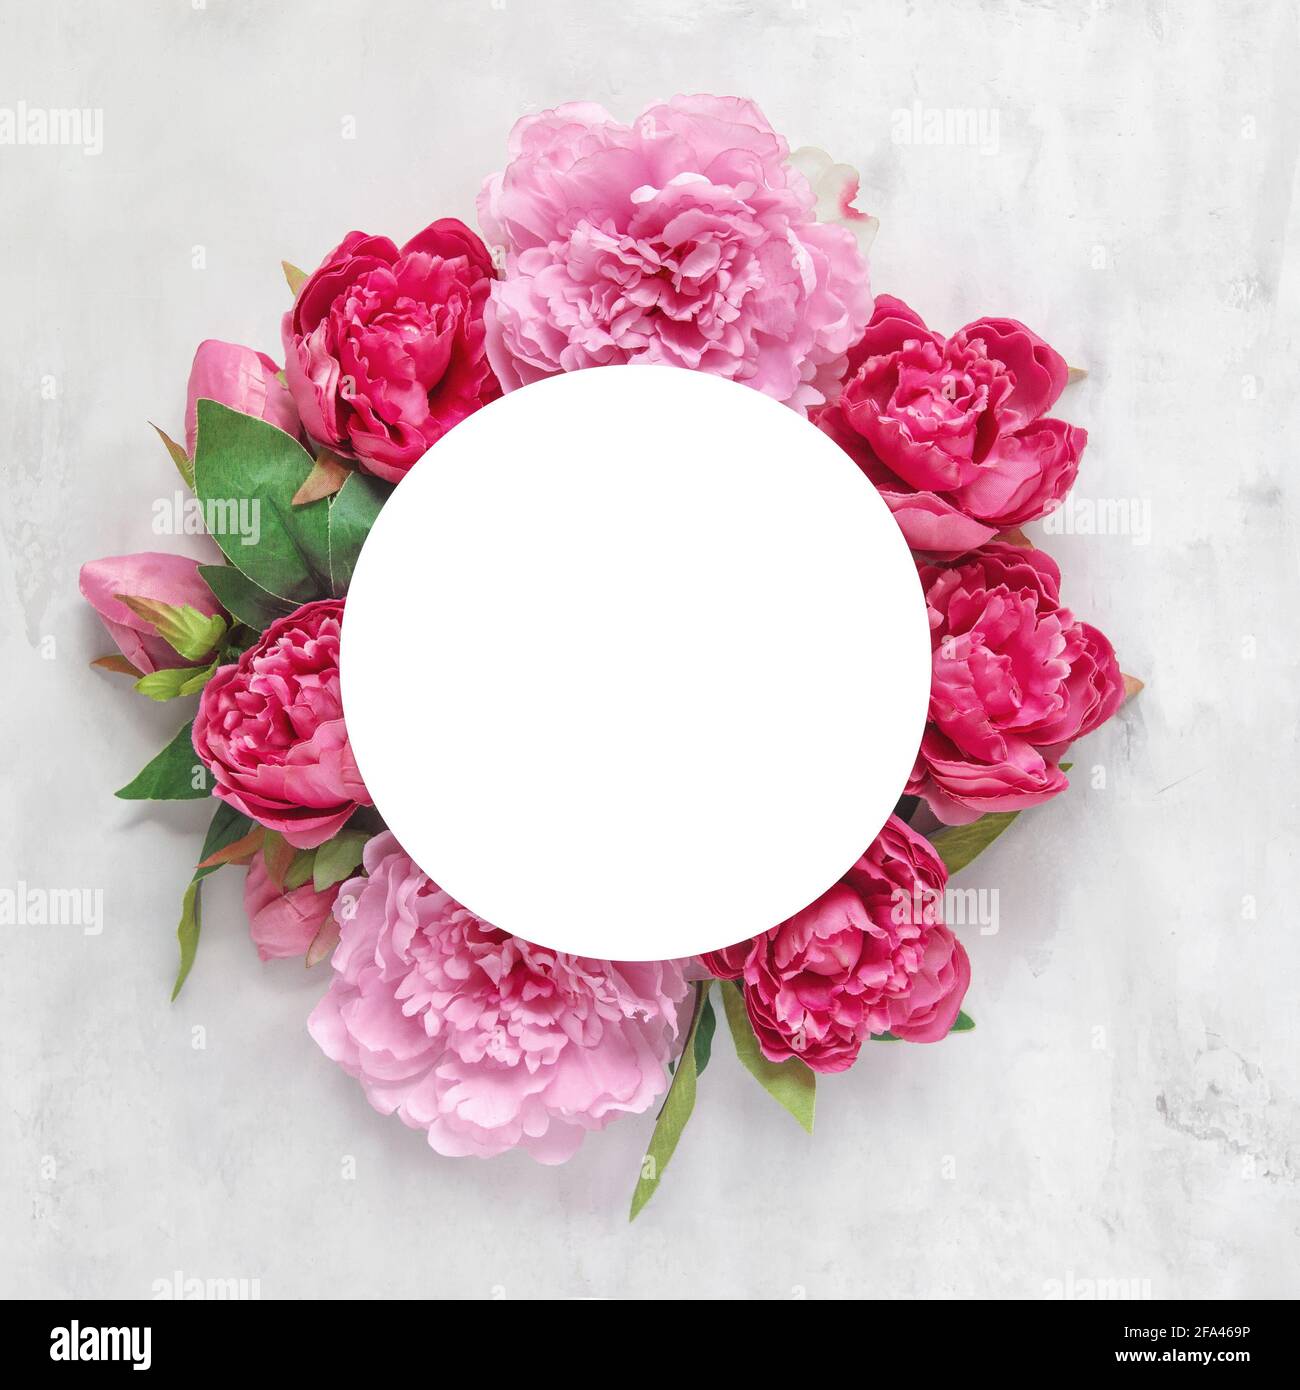 Pink and red peony flowers bouquet on marble stone background. Floral flat lay Stock Photo